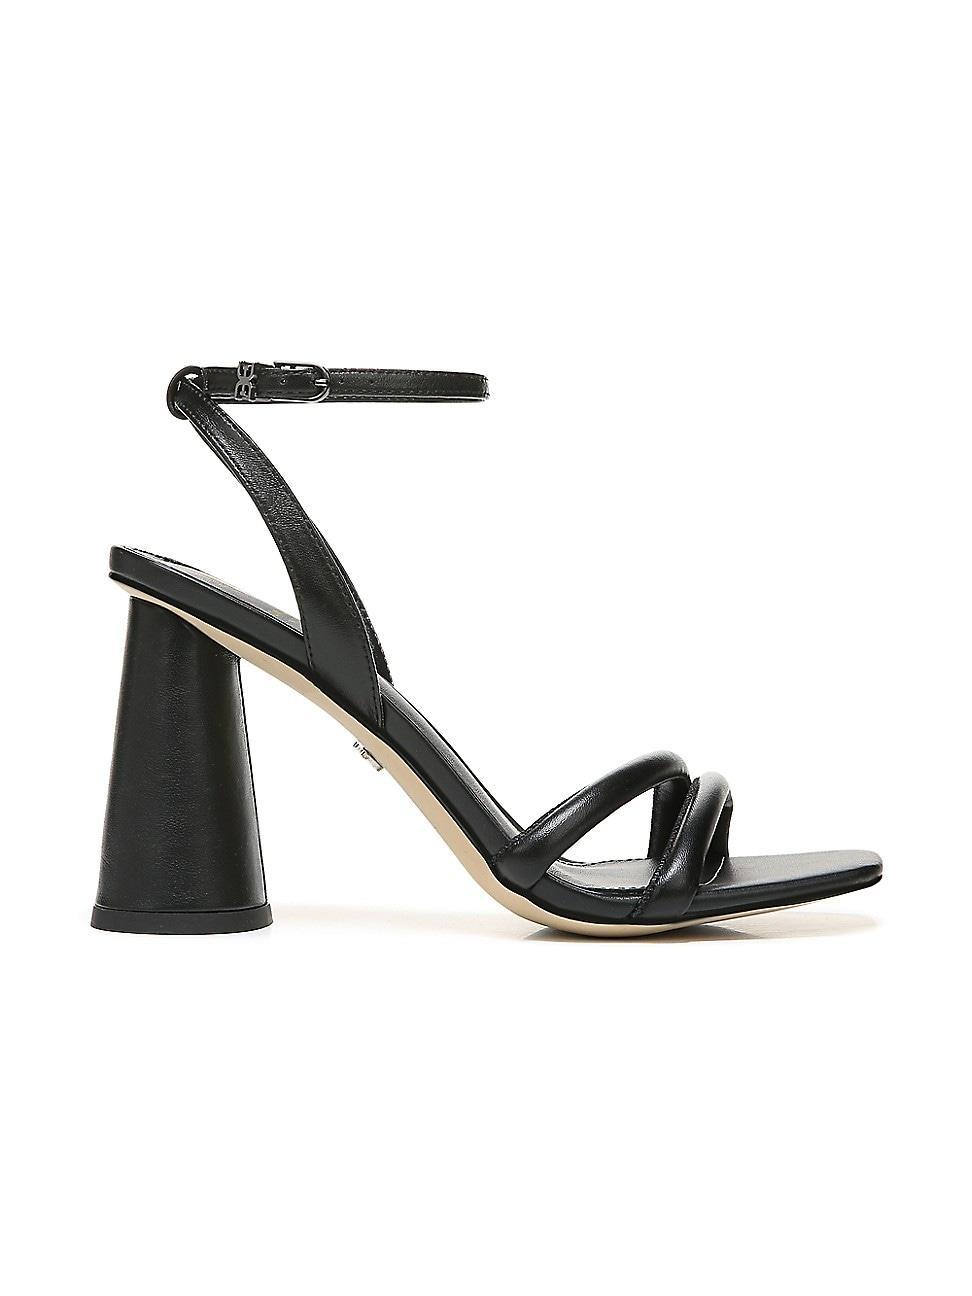 Sam Edelman Kia Strappy Sandal - Wide Width Available Product Image